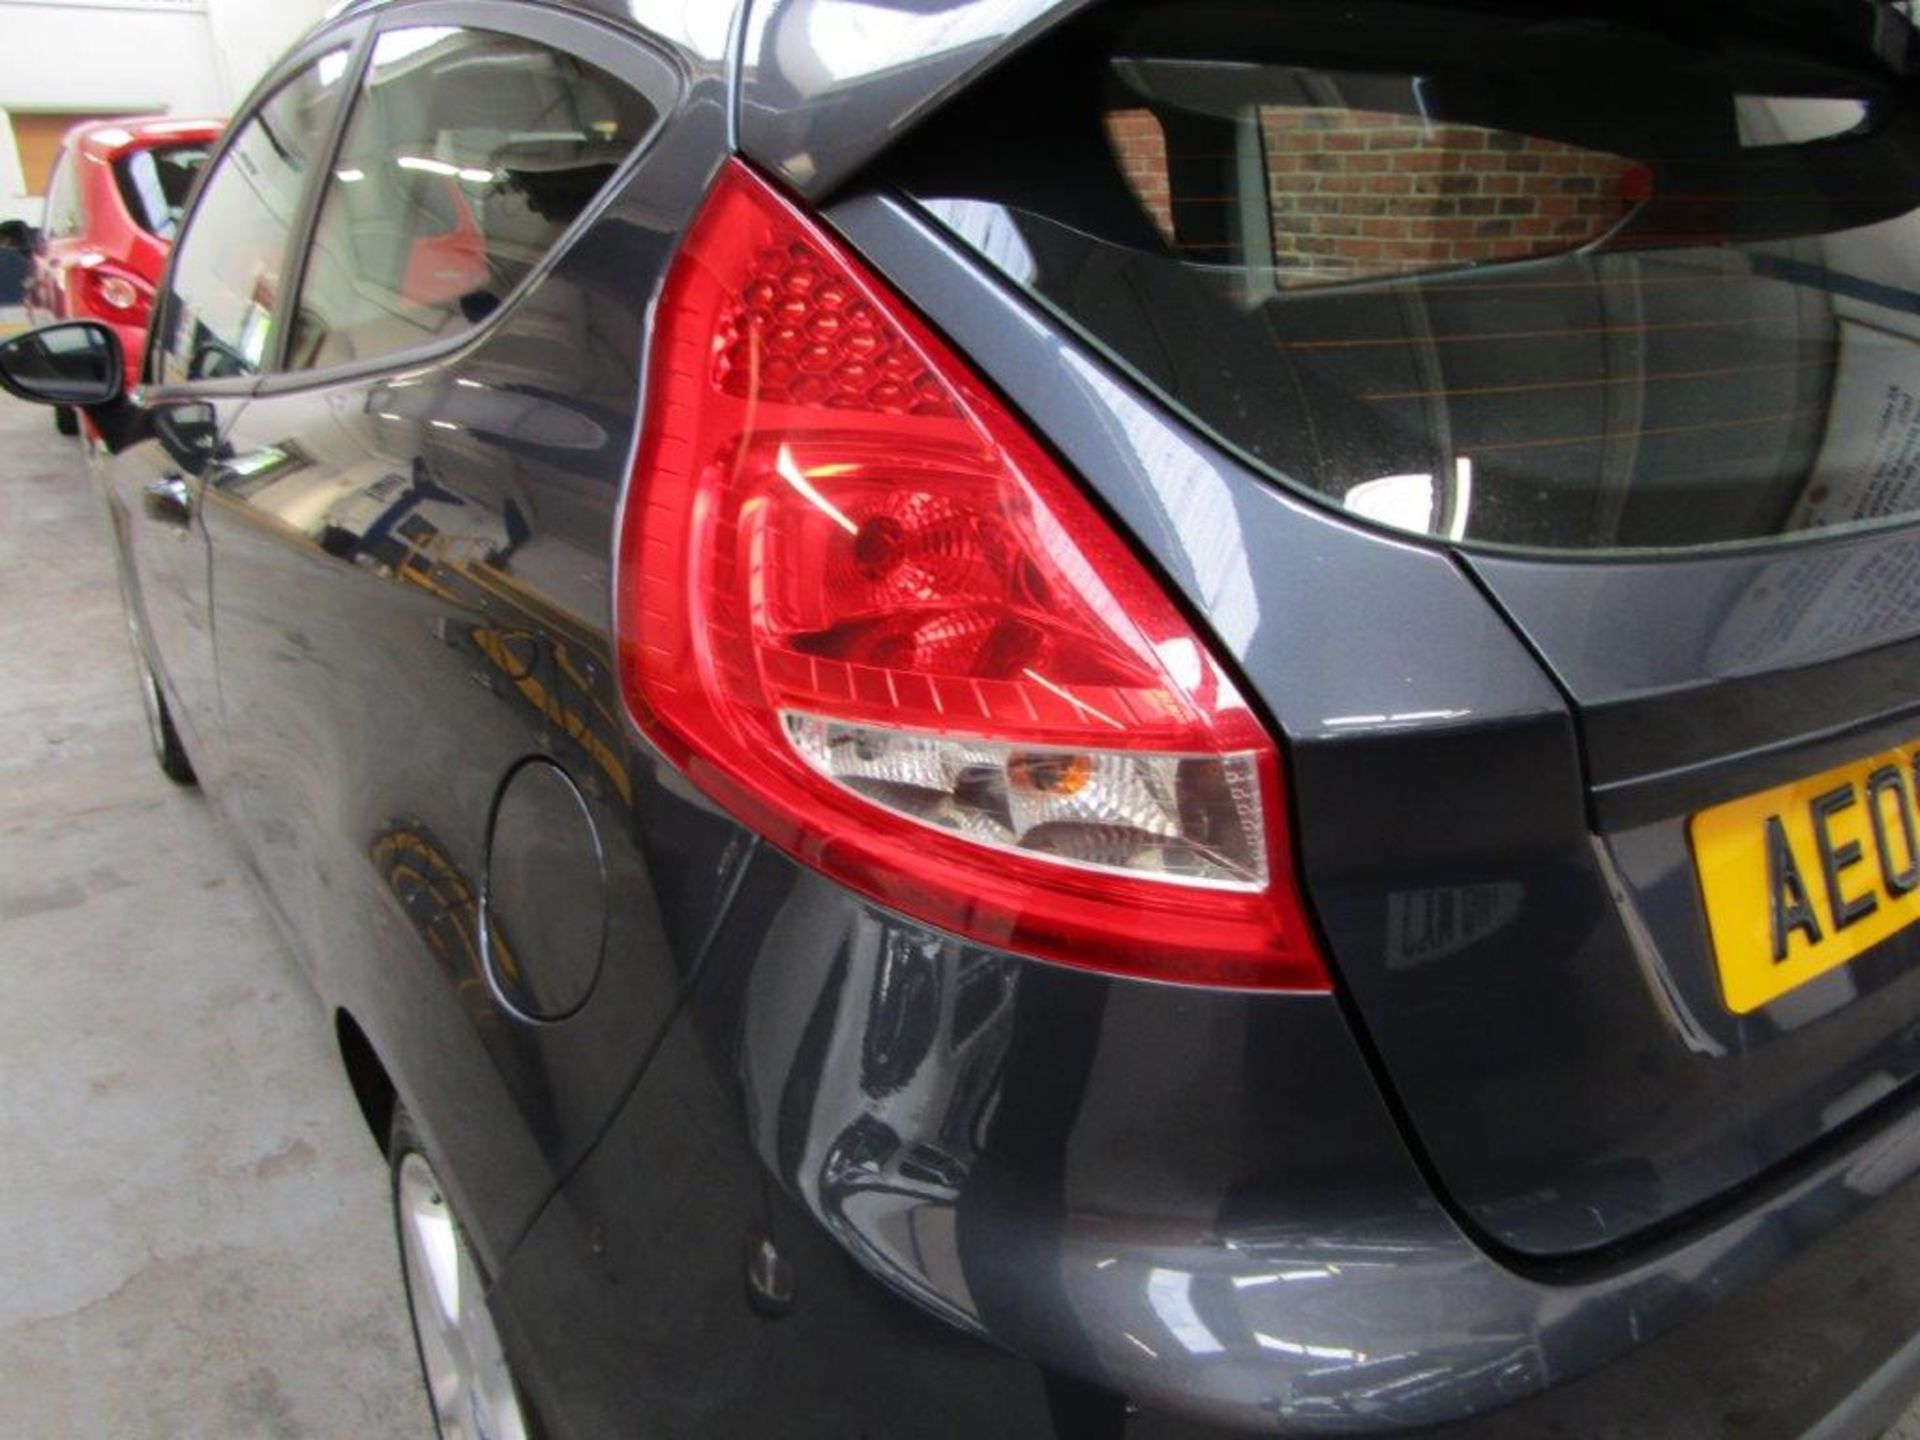 09 09 Ford Fiesta - Image 18 of 21